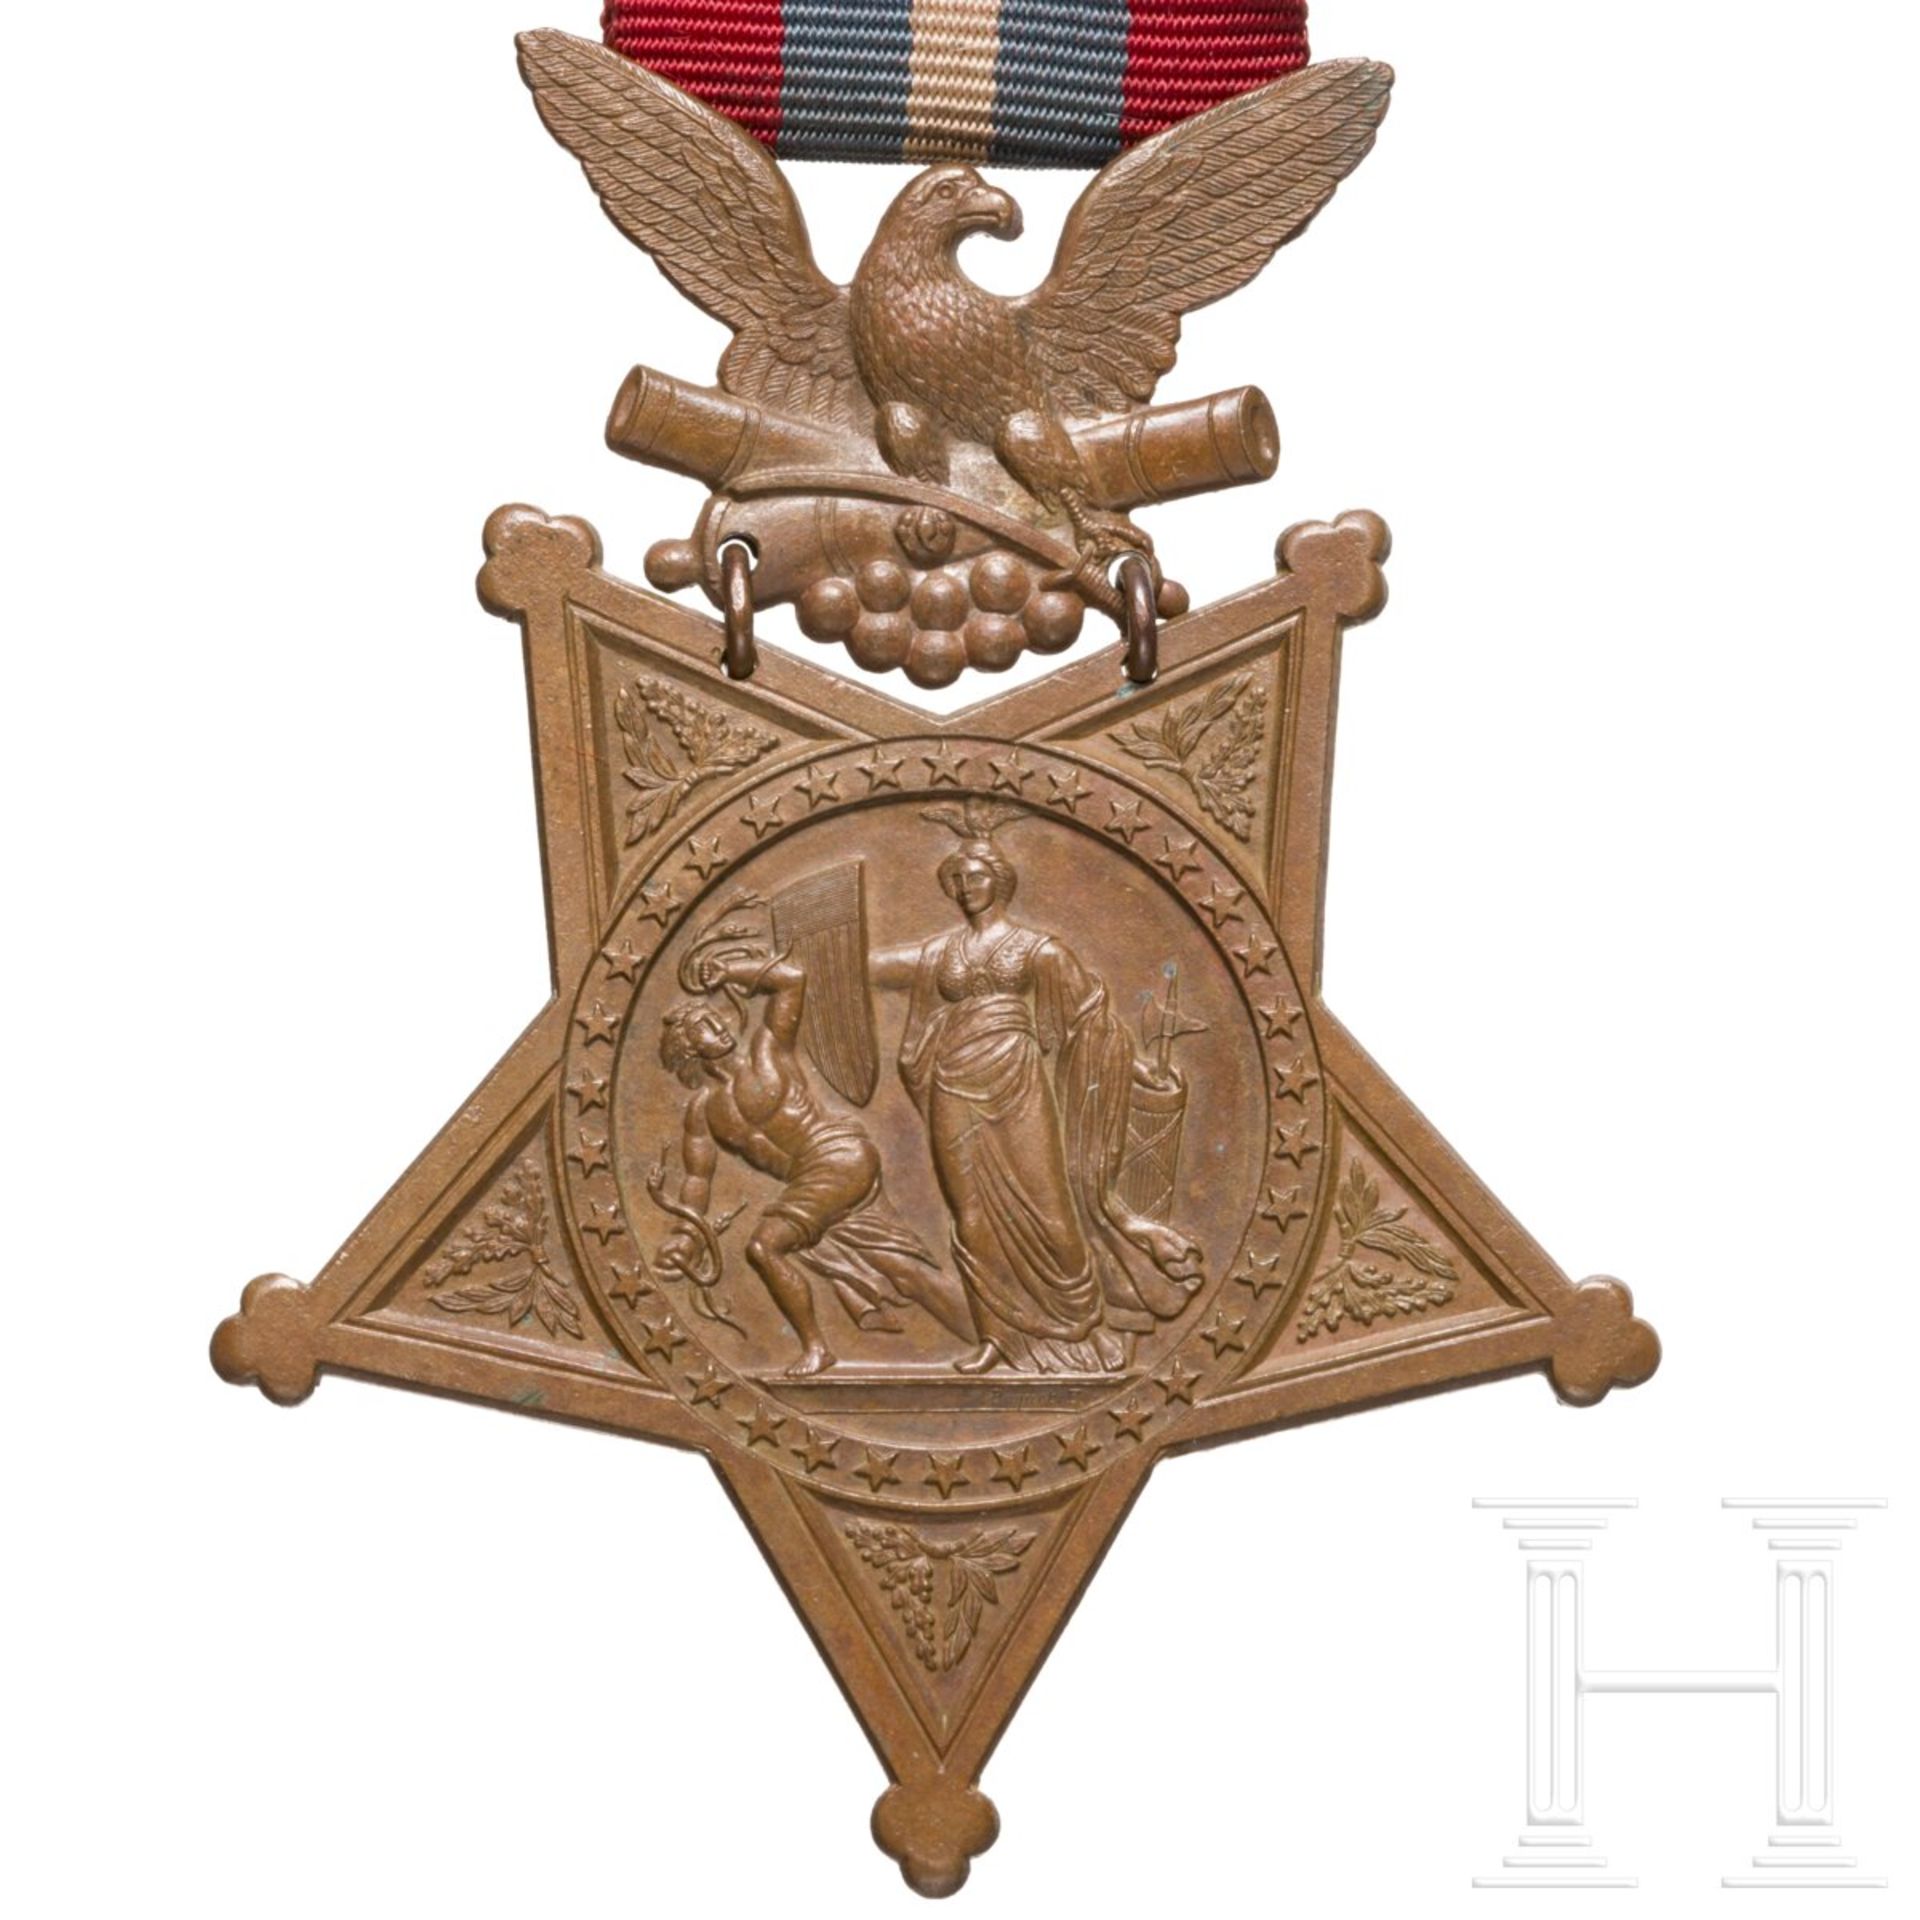 Congressional Medal of Honor in Armeeausführung 1896 - 1904, unverausgabtes Exemplar - Image 3 of 3